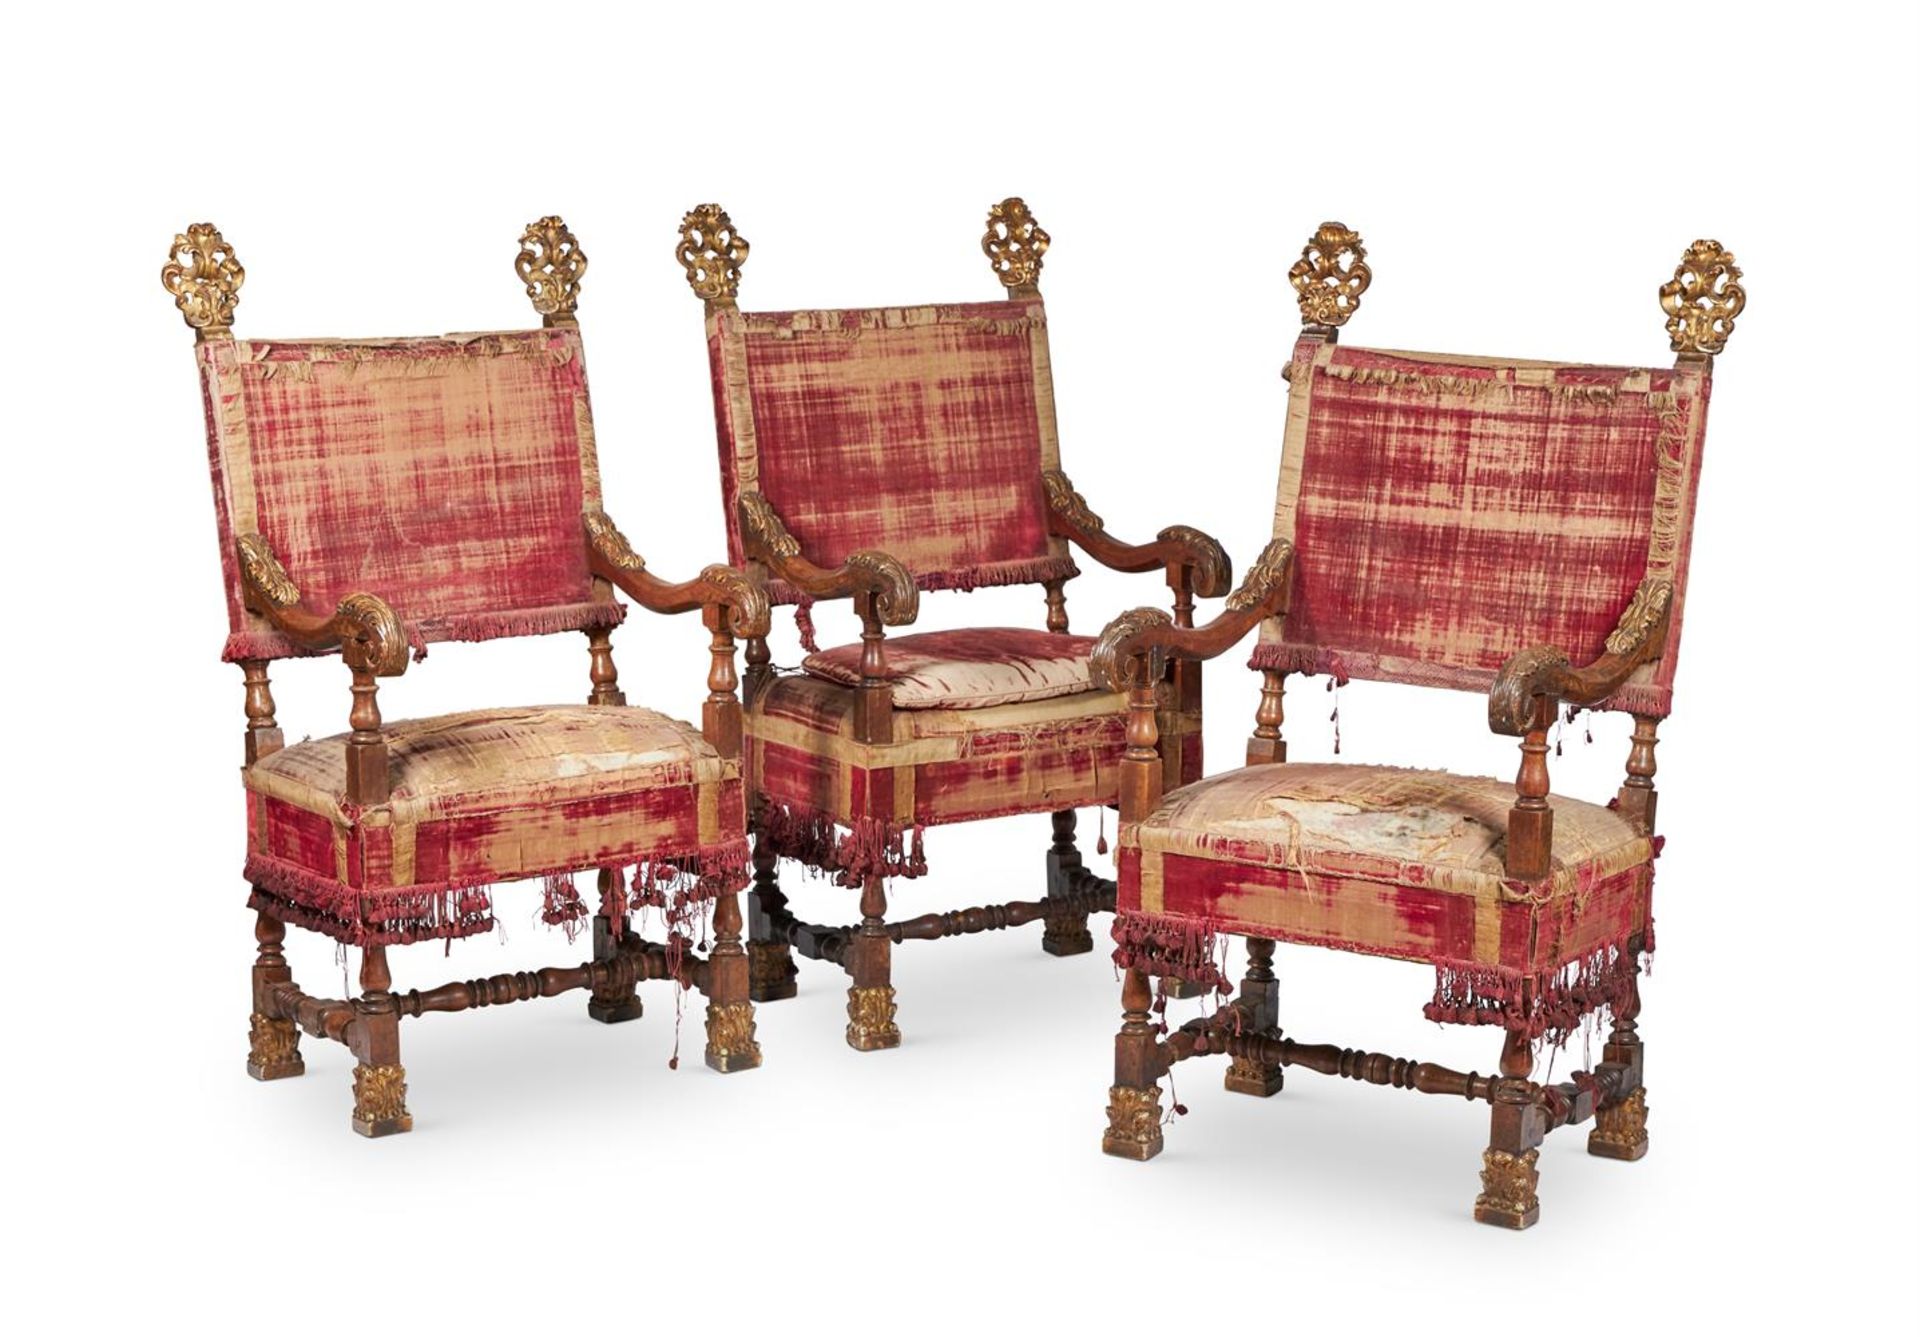 A SET OF THREE ITALIAN WALNUT AND PARCEL GILT ARMCHAIRS, LATE 17TH OR EARLY 18TH CENTURY